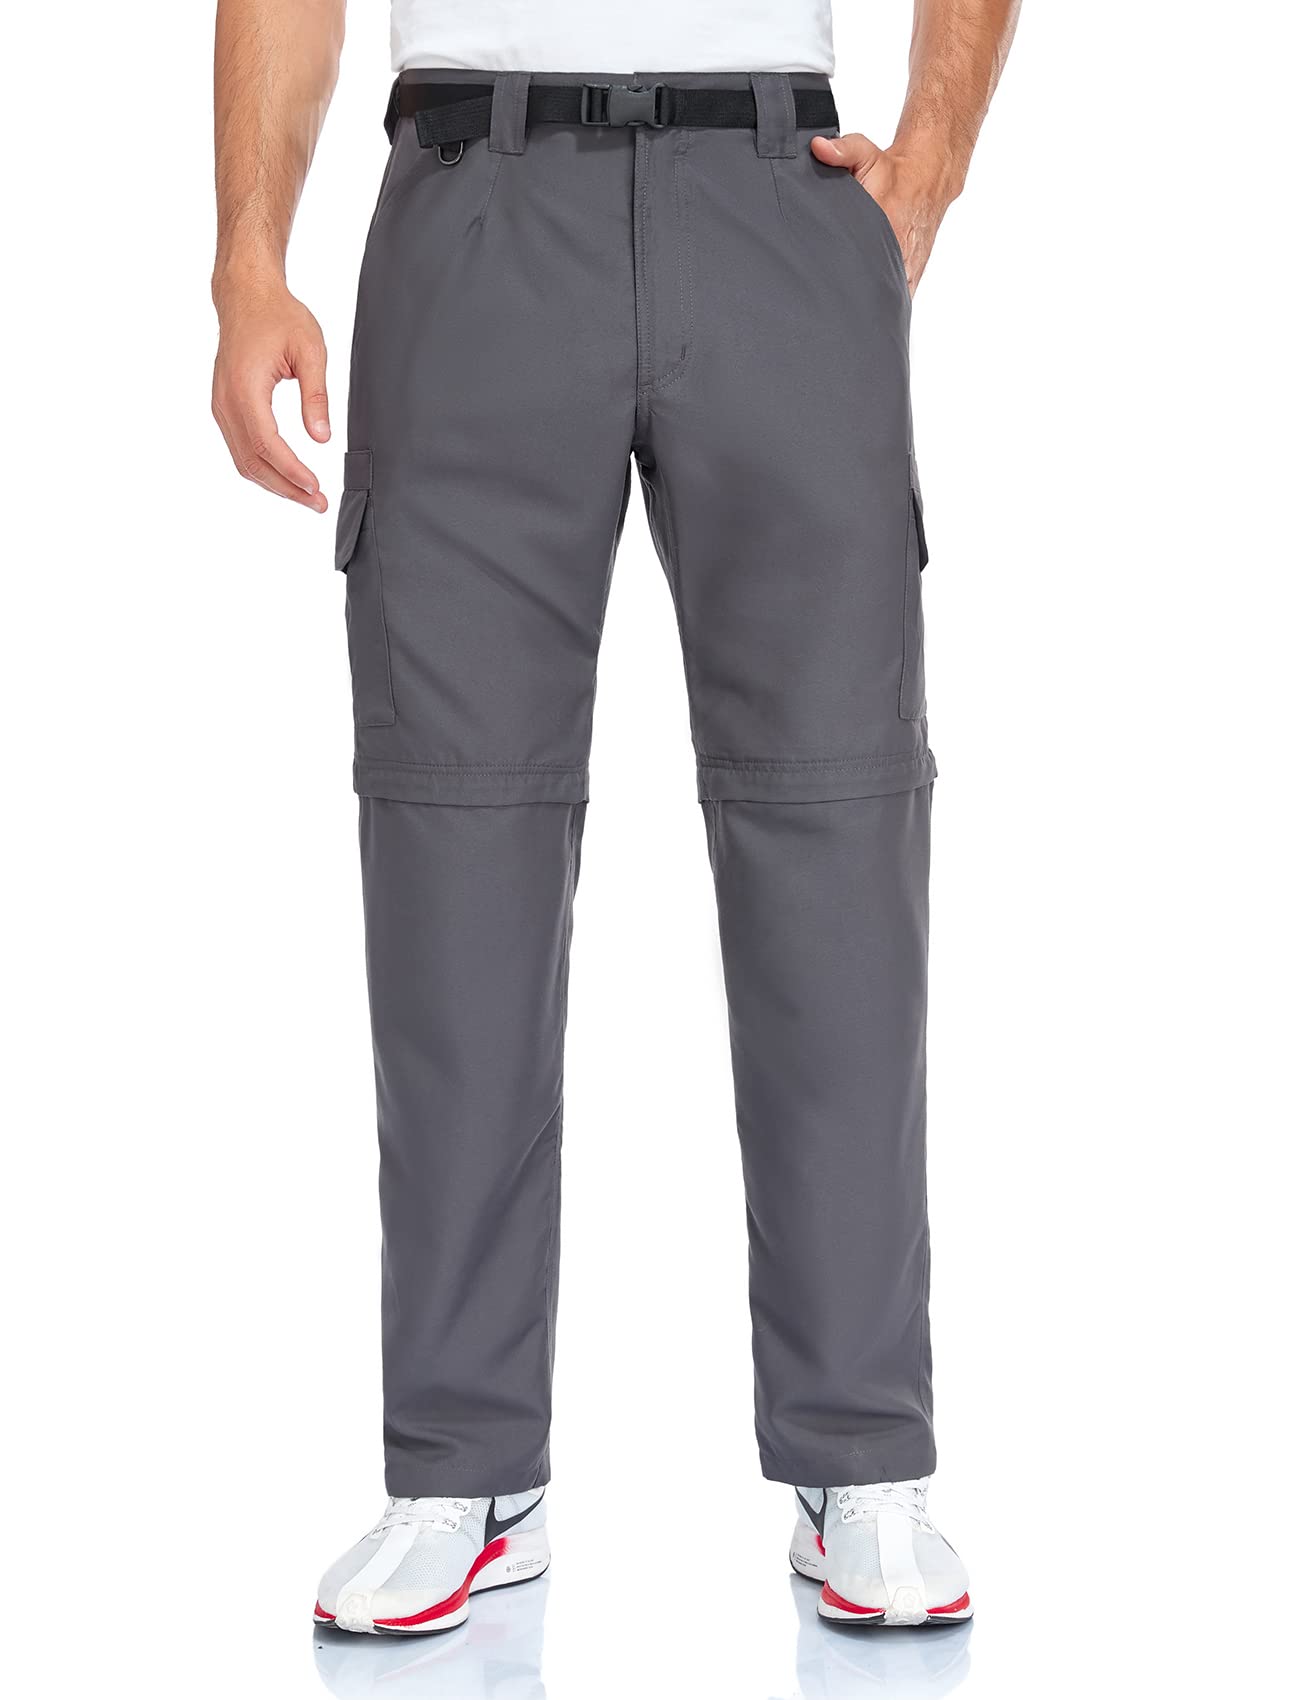 These Convertible Hiking Pants Are Just $41 at Amazon